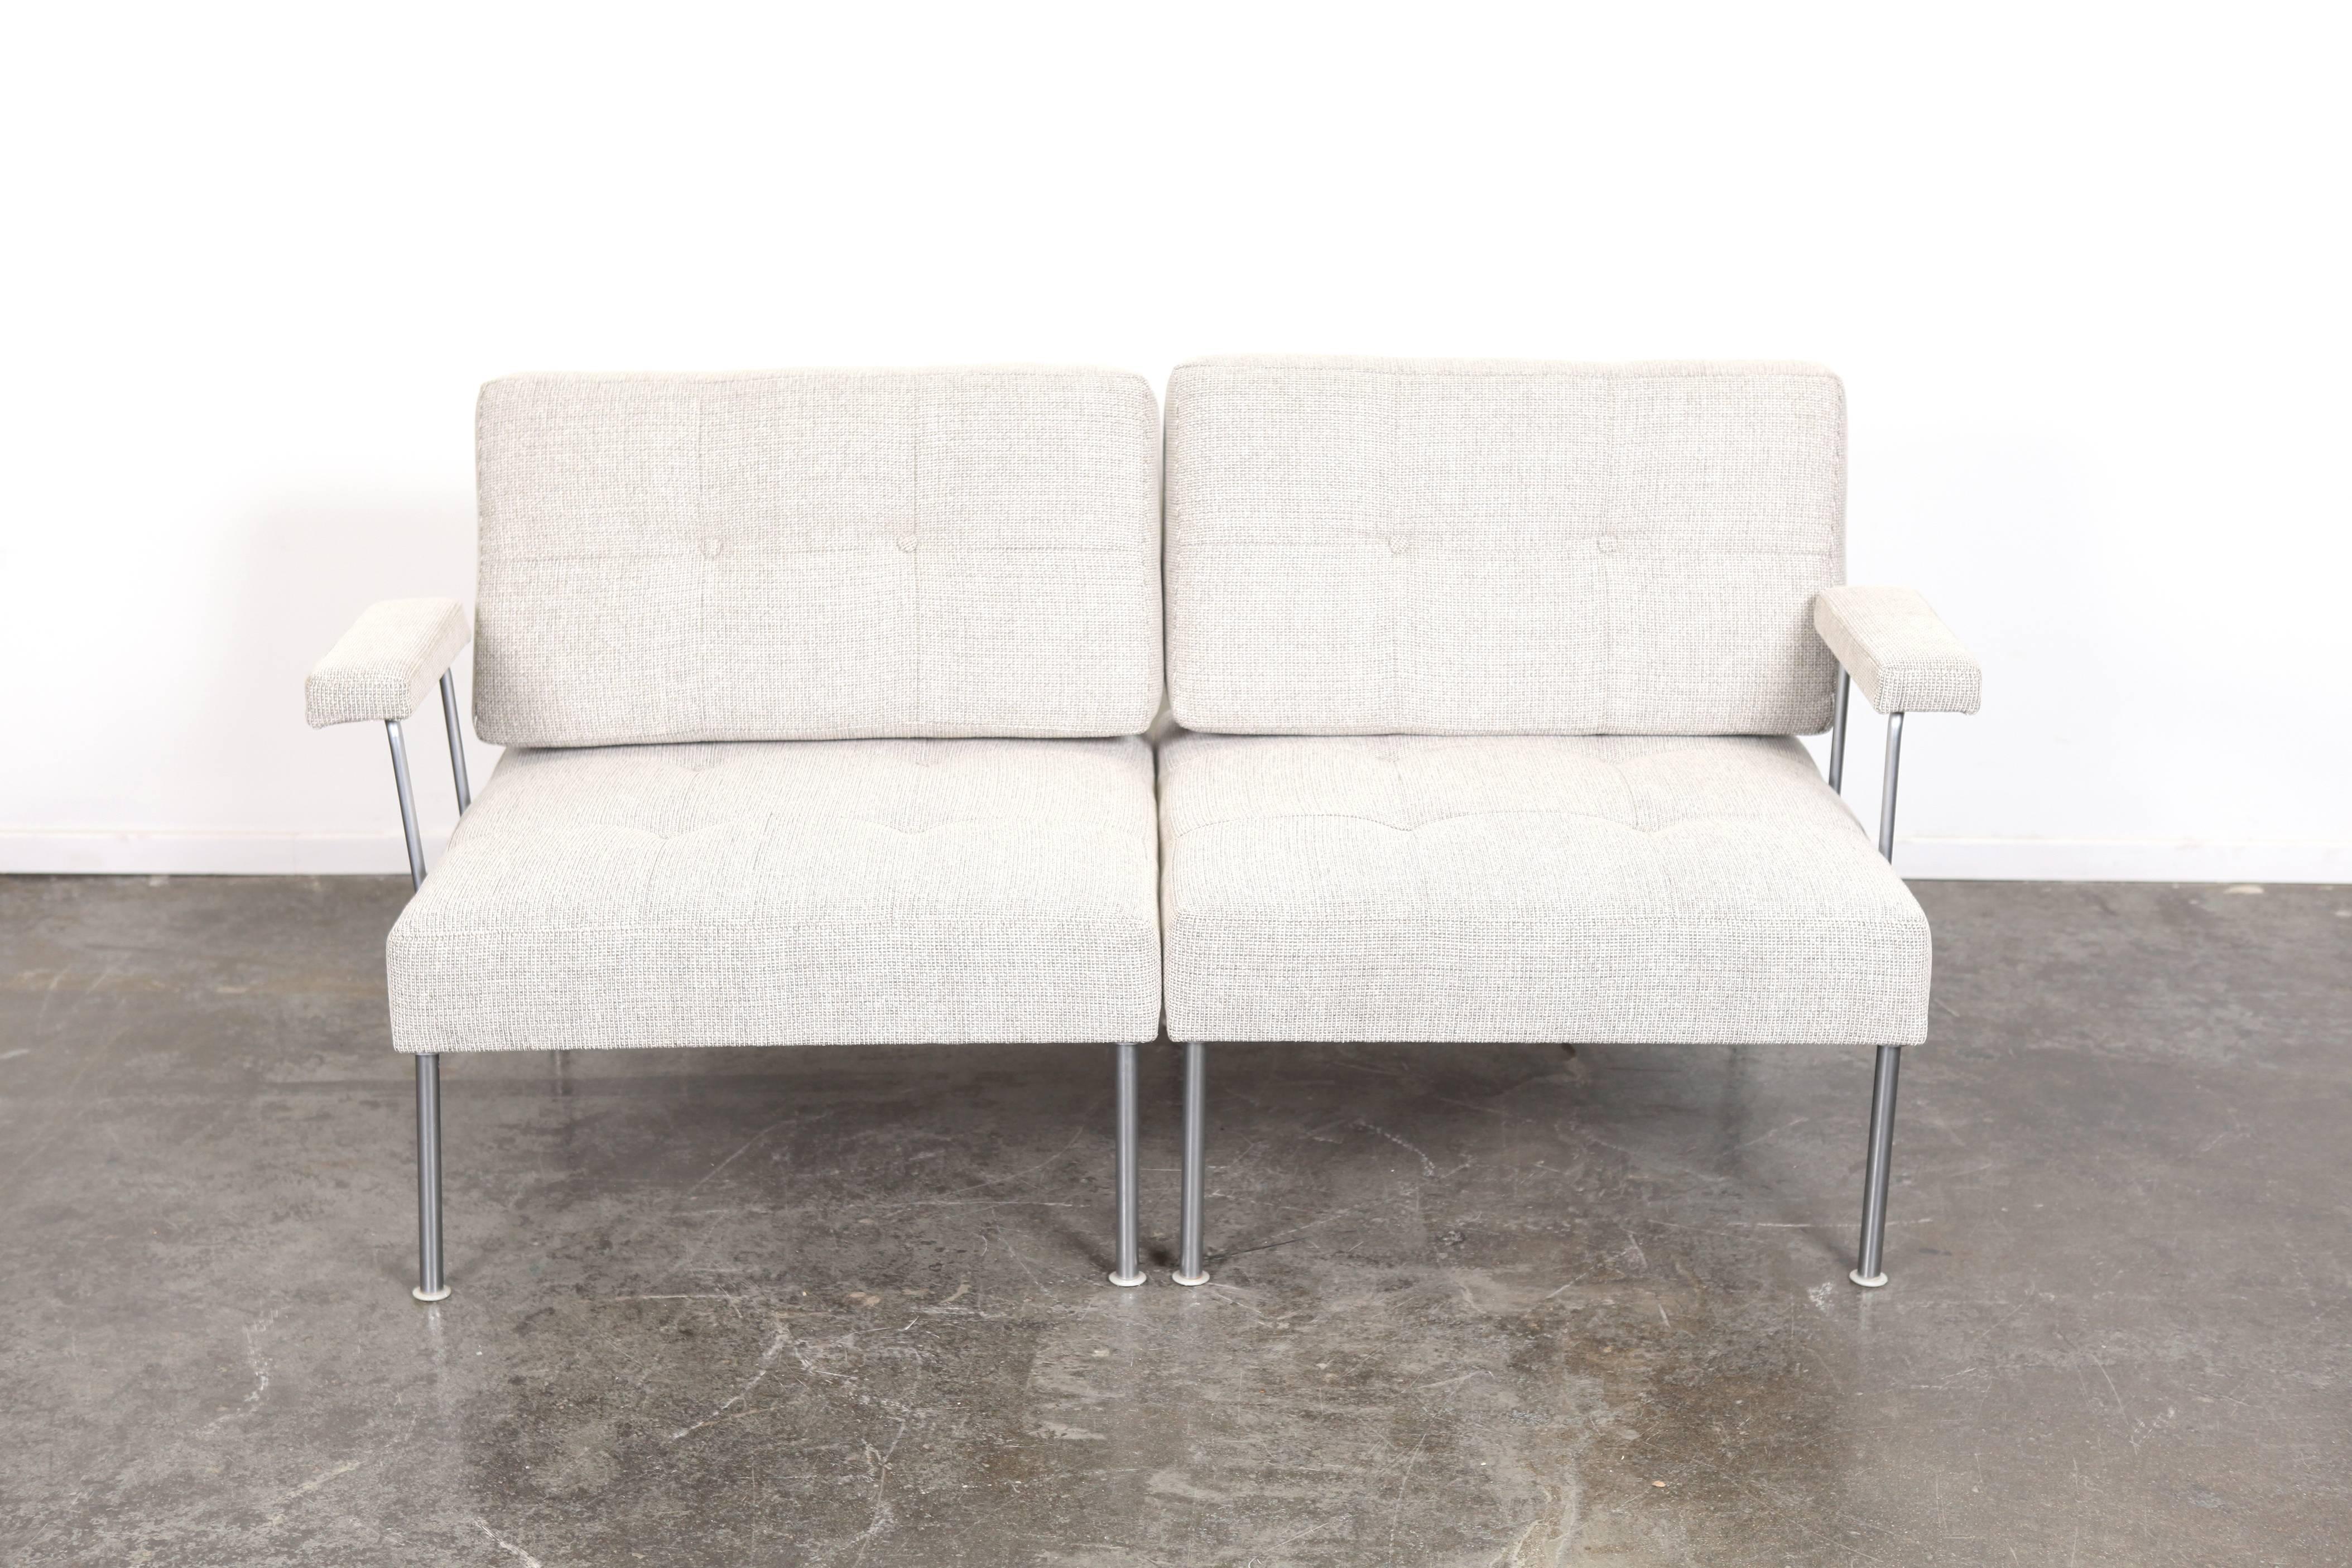 Danish Mid-Century Modern modular steel frame 'Revolt' sectional sofa by Poul Cadovius. Newly upholstered in a combination of cement and off-white contrasted with a dark grey weave. Arms can be removed to form a 3 seat sofa which connect with a